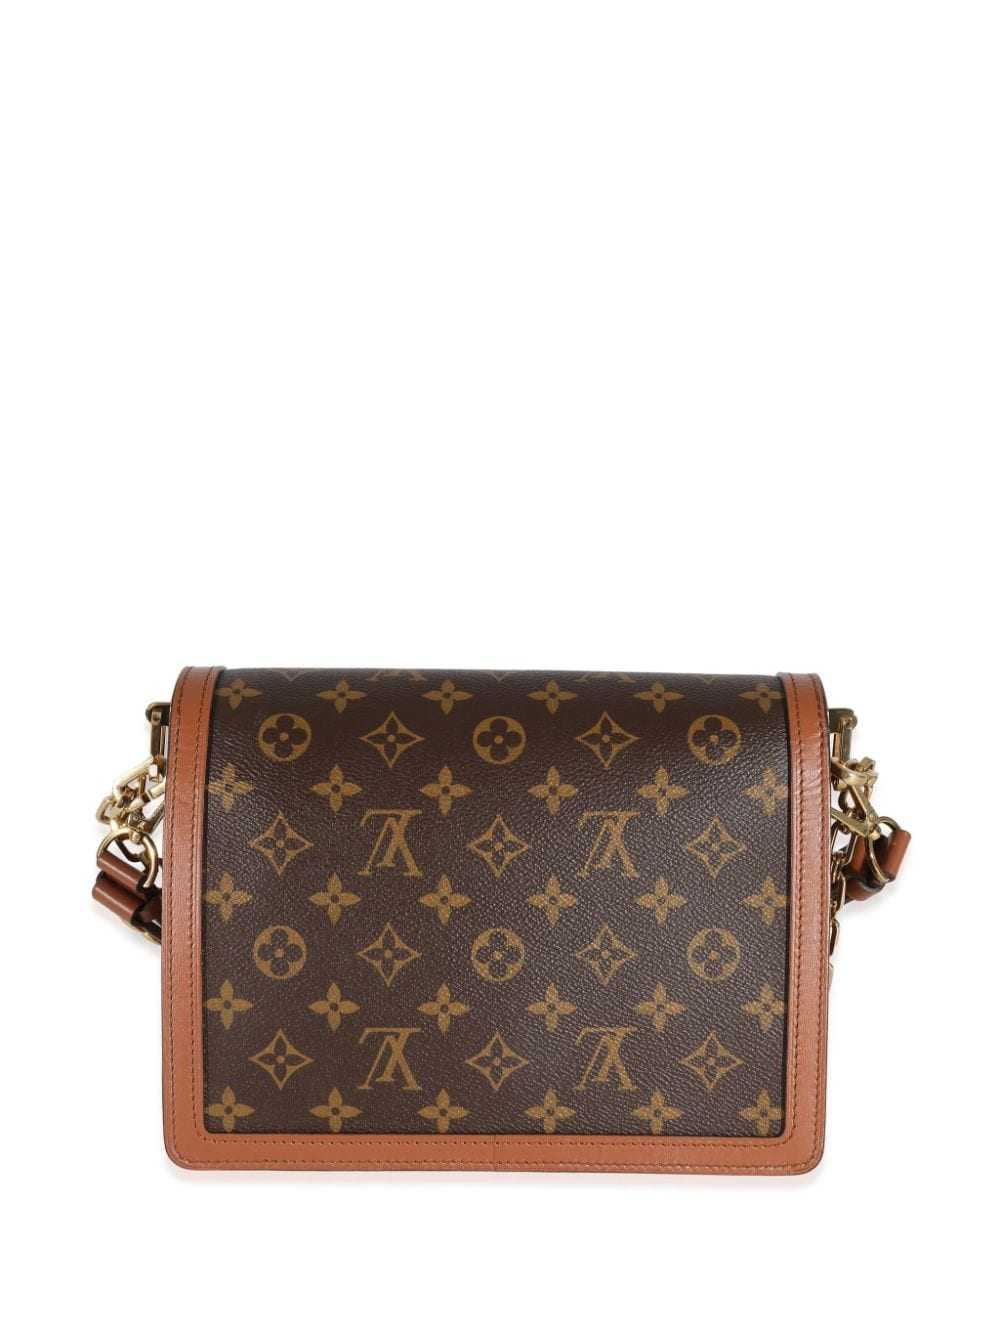 Louis Vuitton Pre-Owned 2021-2022 Dauphine MM sho… - image 2